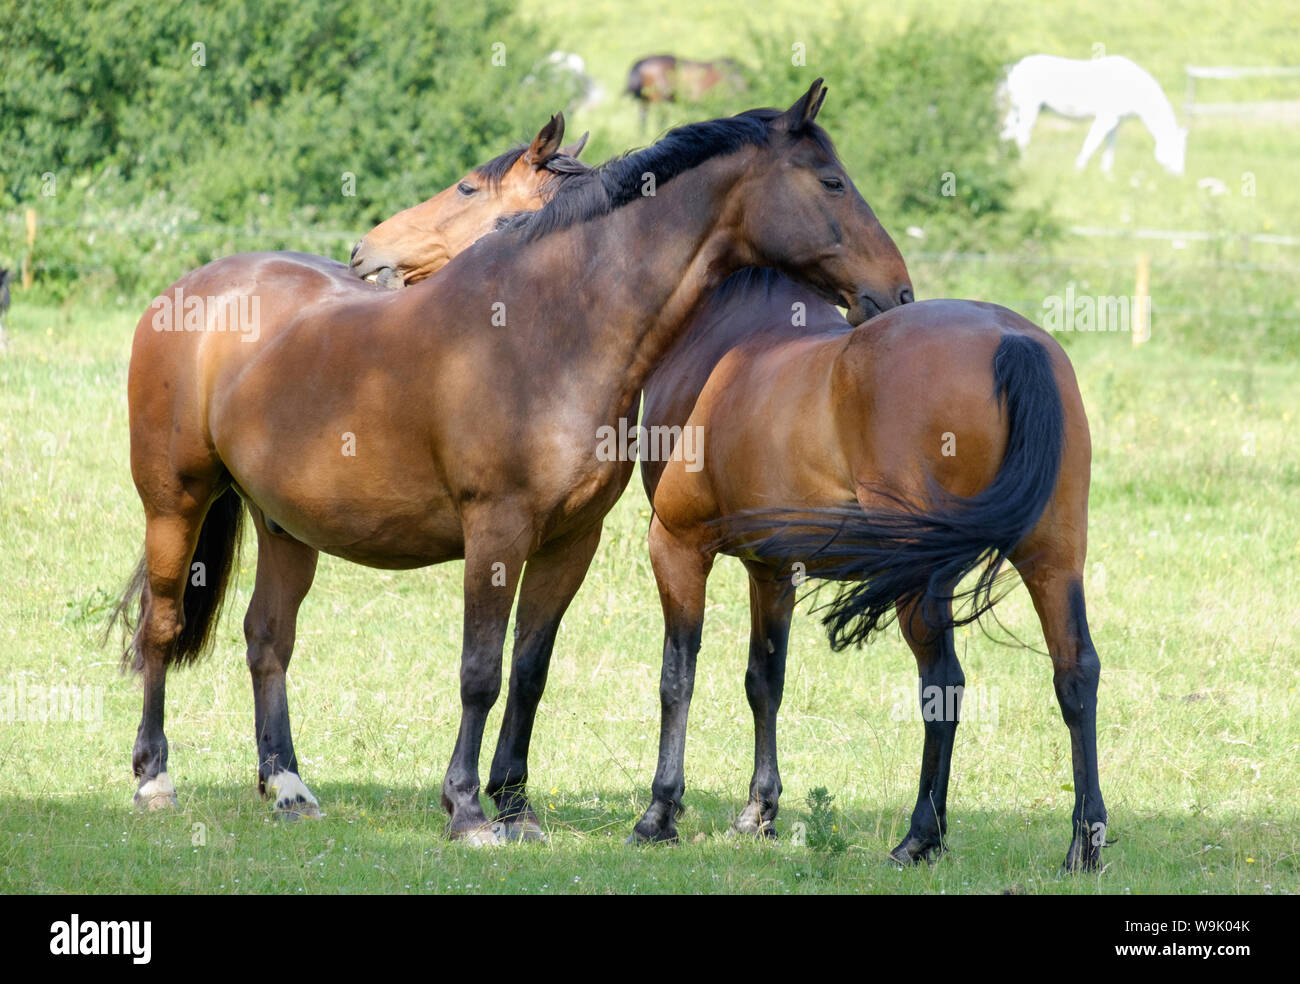 Two brown horses seem to show affection to each other, in a green field. More horses in background. Bury Farm, Edgware, Greater London, UK. Stock Photo